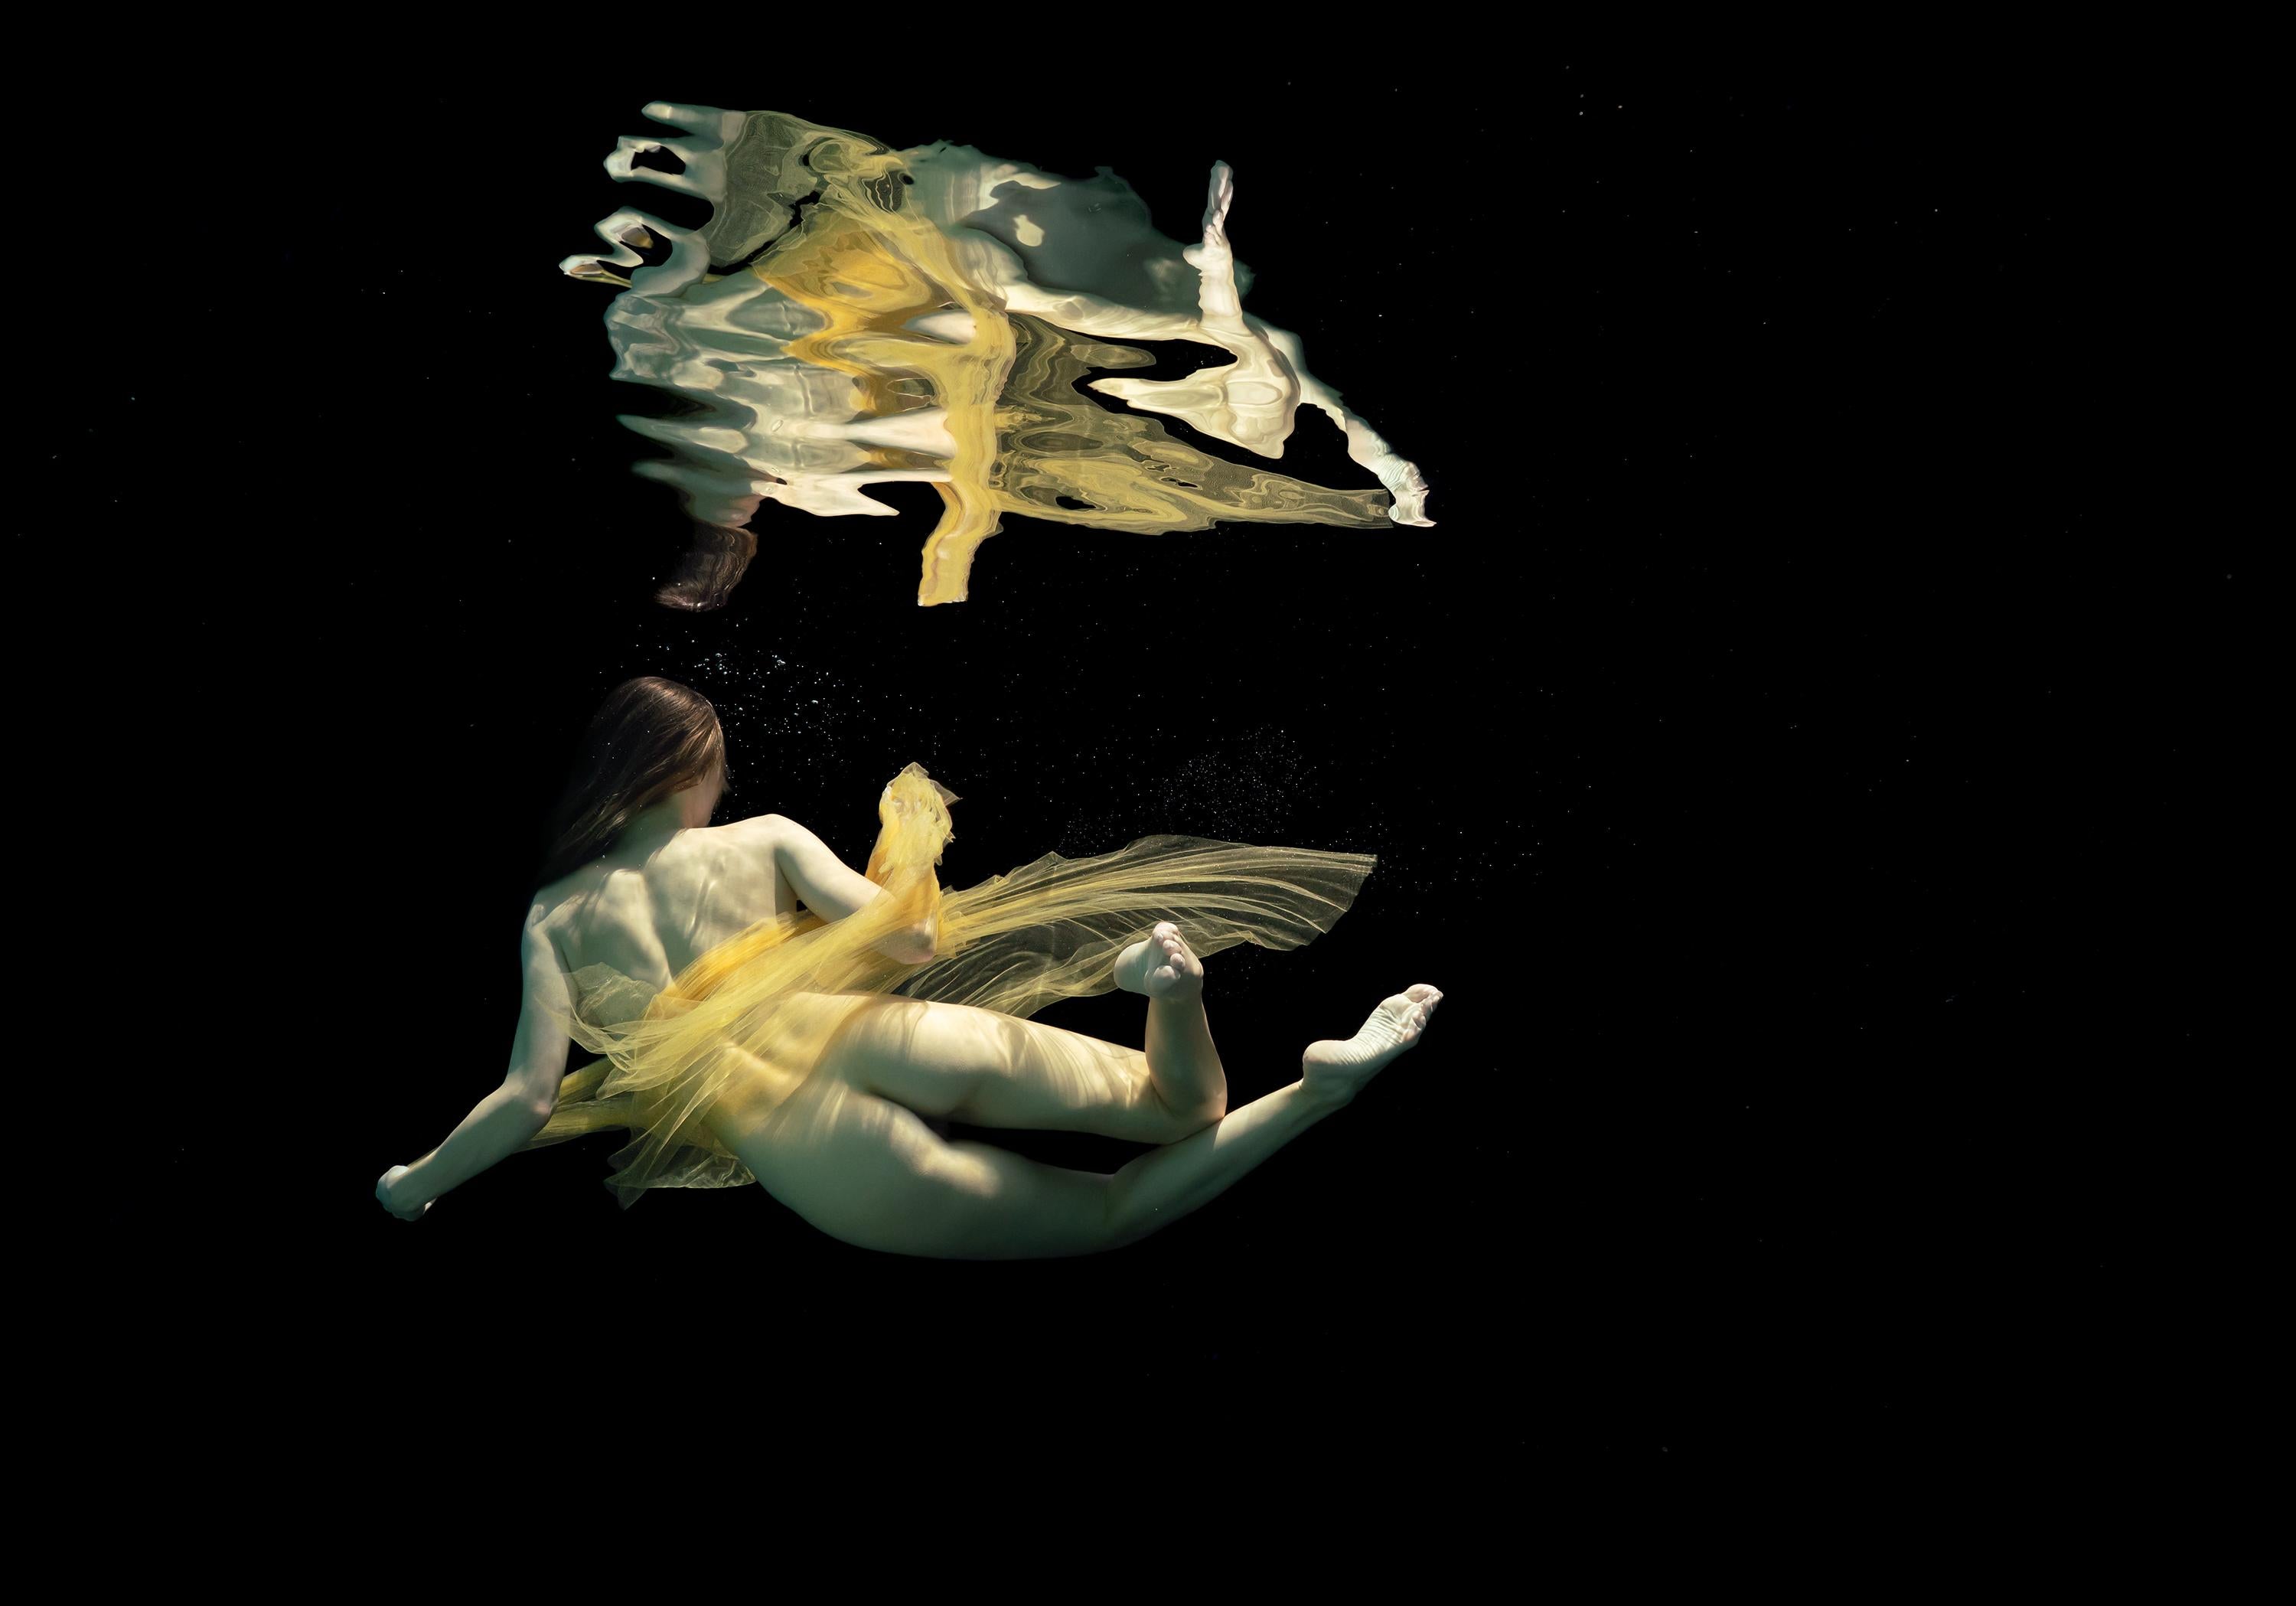 Alex Sher Color Photograph - Song of Songs - underwater nude photograph - archival pigment print 16x24"